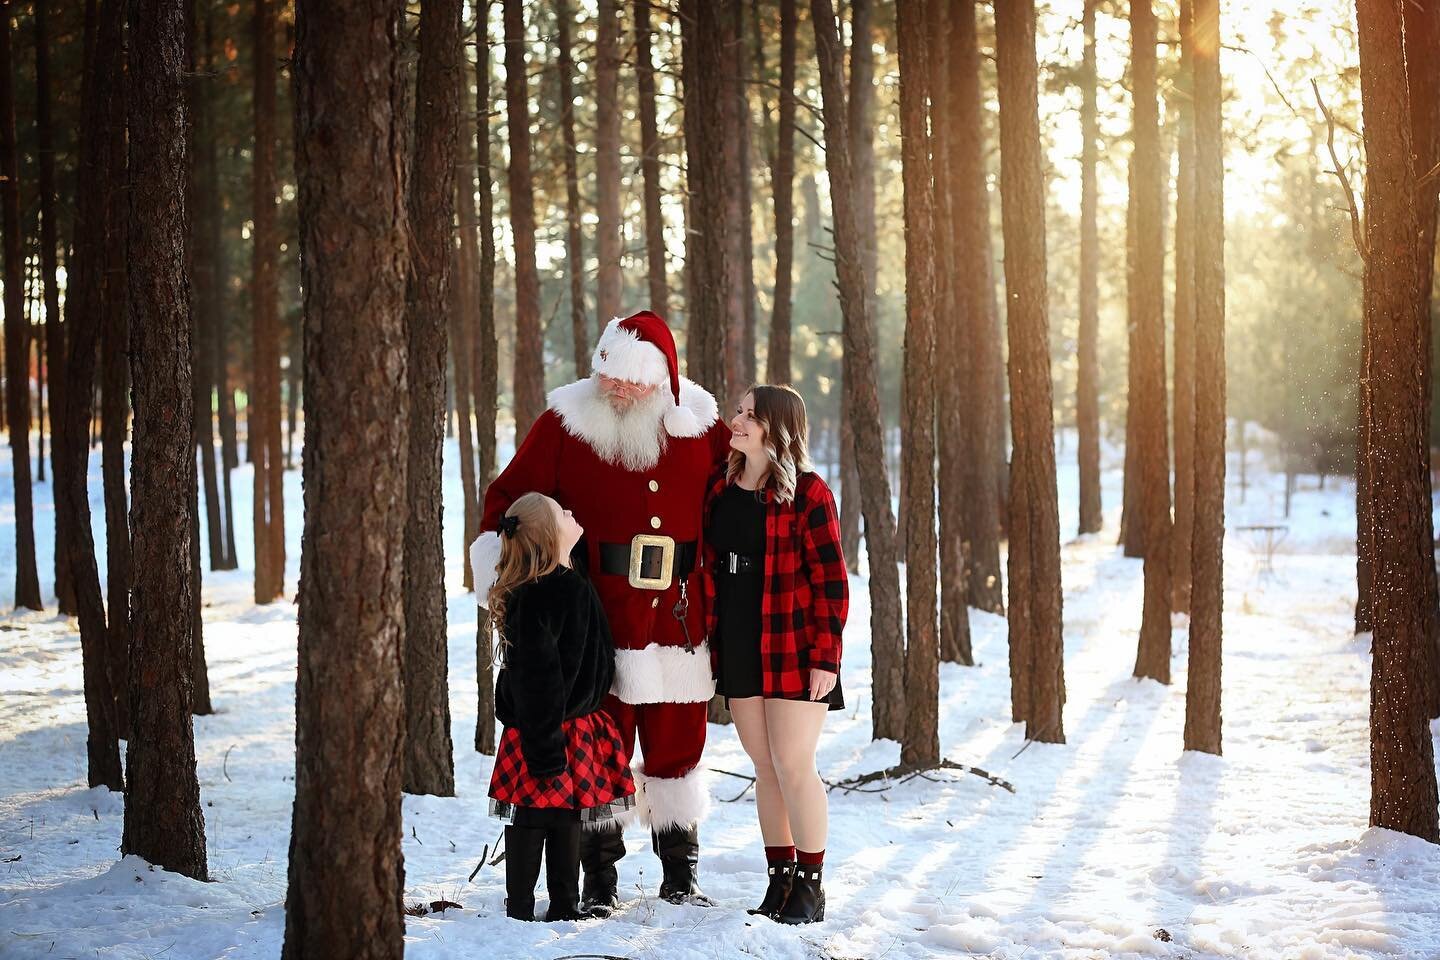 Friends! We&rsquo;ve got just FIVE spots left for photos on December 4th! Join us for a magical Santa and family portrait experience that you won&rsquo;t find anywhere else- and we might just be joined by Santa&rsquo;s elves this time! Lots of natura